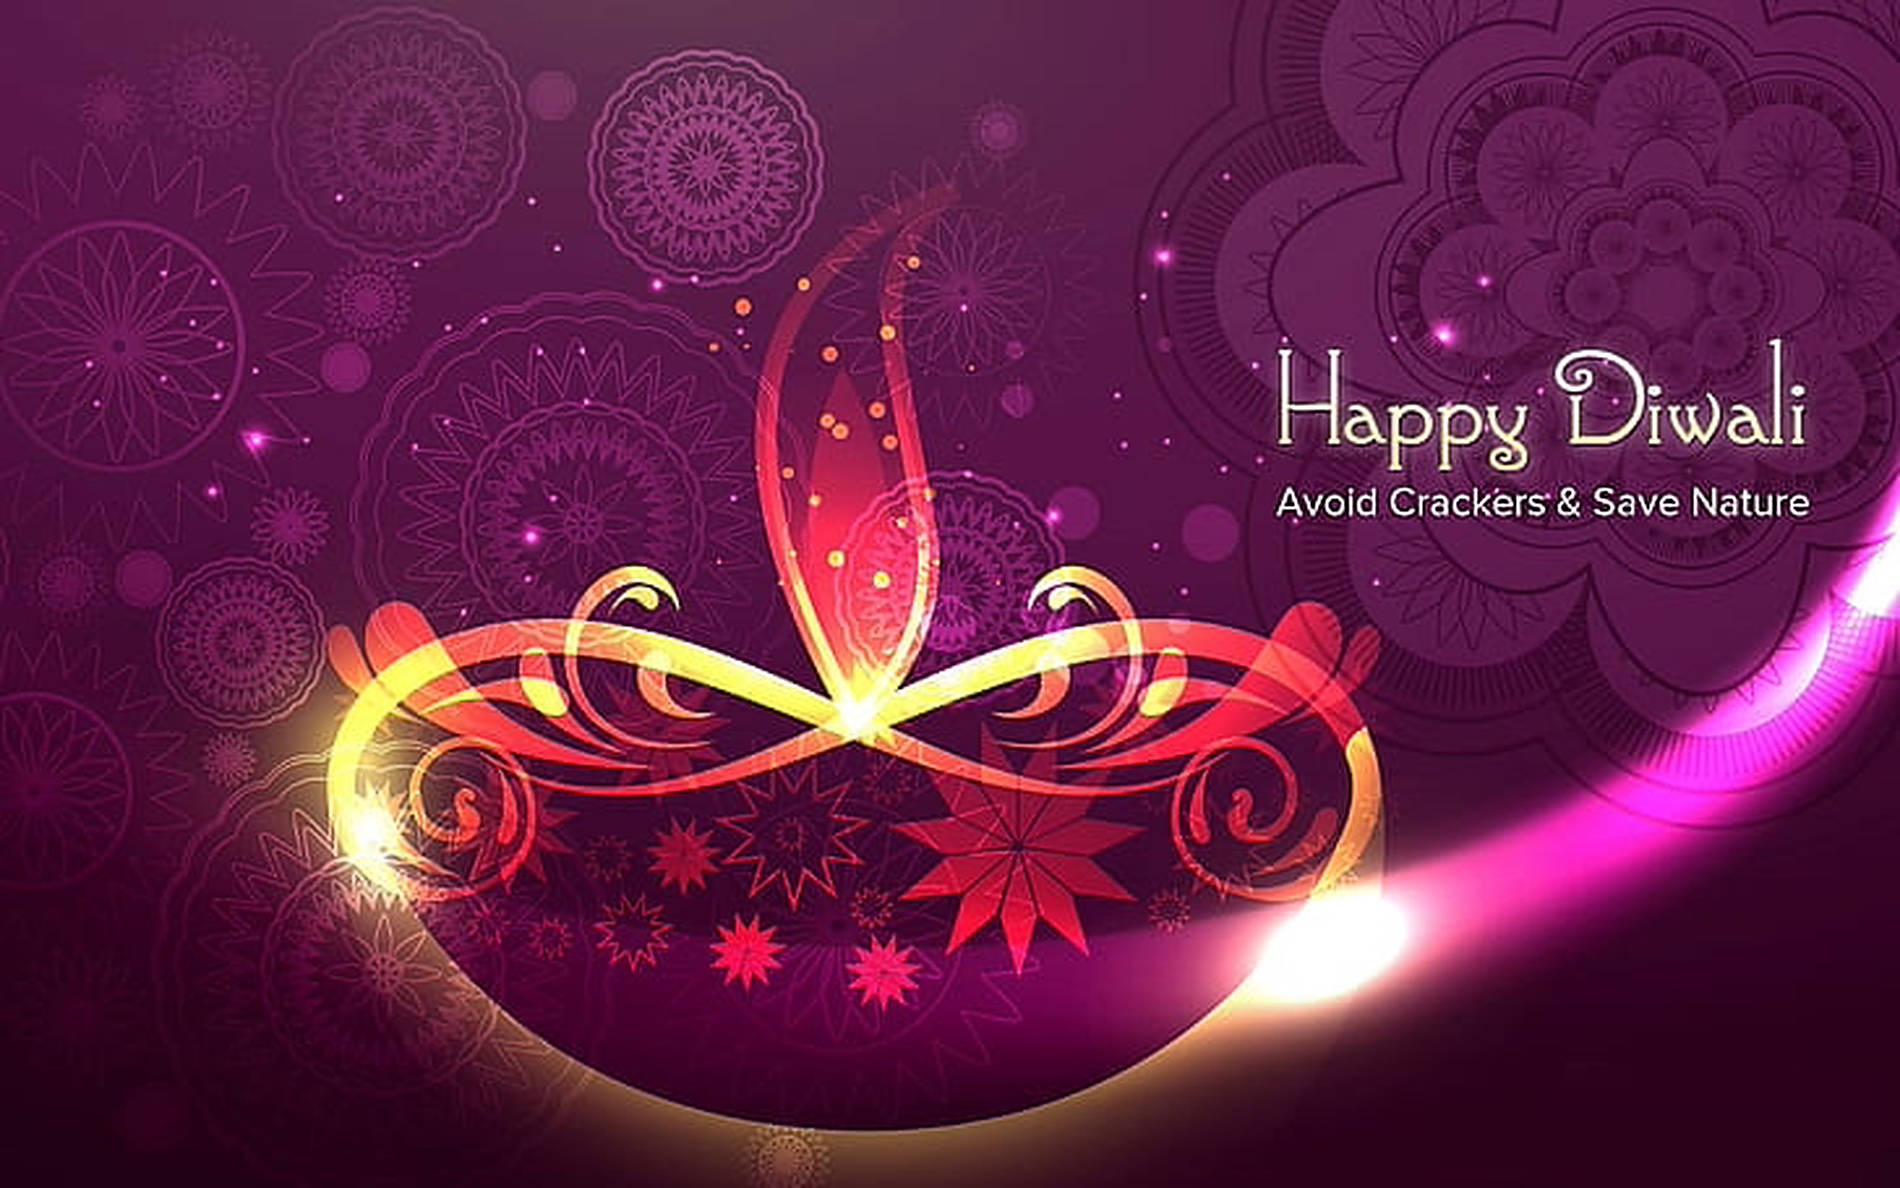 Background for diwali festival with lamps Vector background for diwali  festival  affi  Happy diwali wallpapers Happy diwali images Happy  diwali wishes images